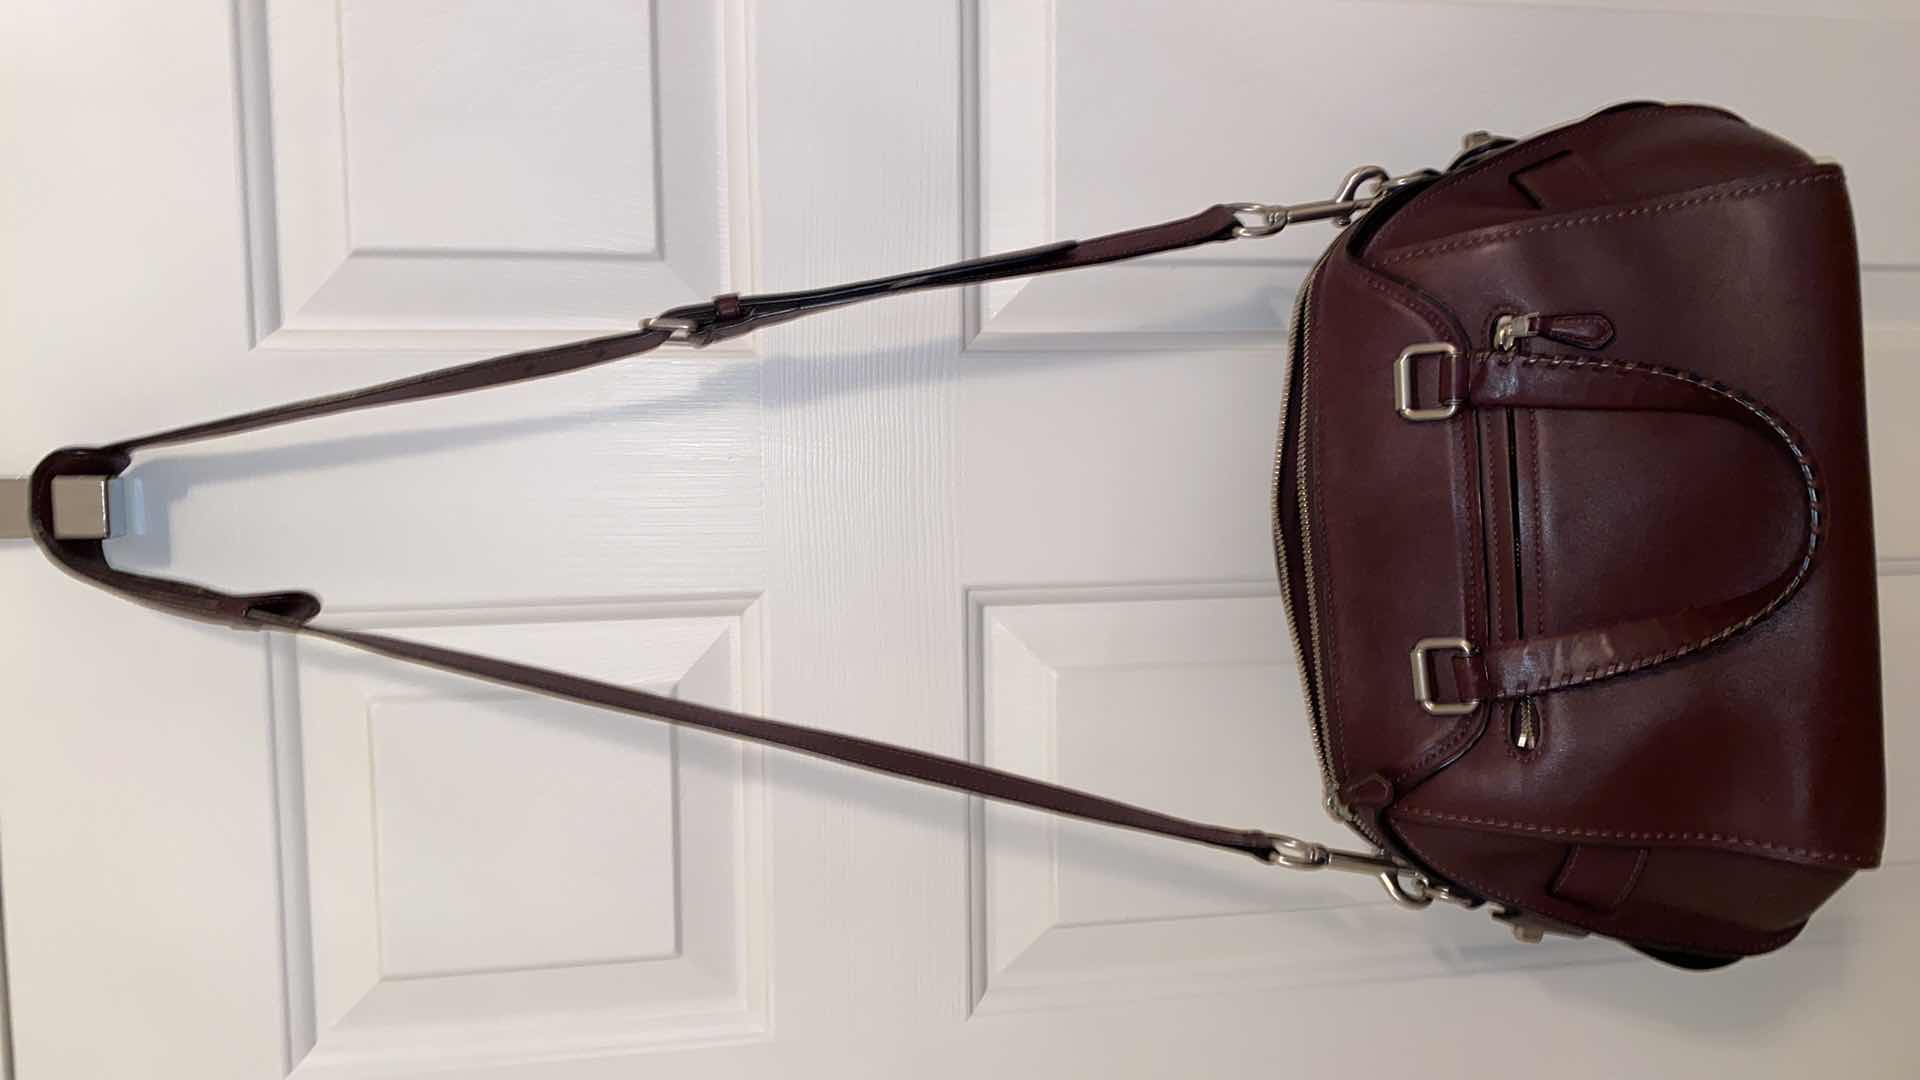 Photo 6 of $869 AUTHENTIC COACH ACE SATCHEL IN BURGUNDY WITH STRAP, WHIPSTITCHED HANDLES AND GUNMETAL HARDWARE INCLUDES DUSTBAG- NON RETURABLE - FINAL SALE